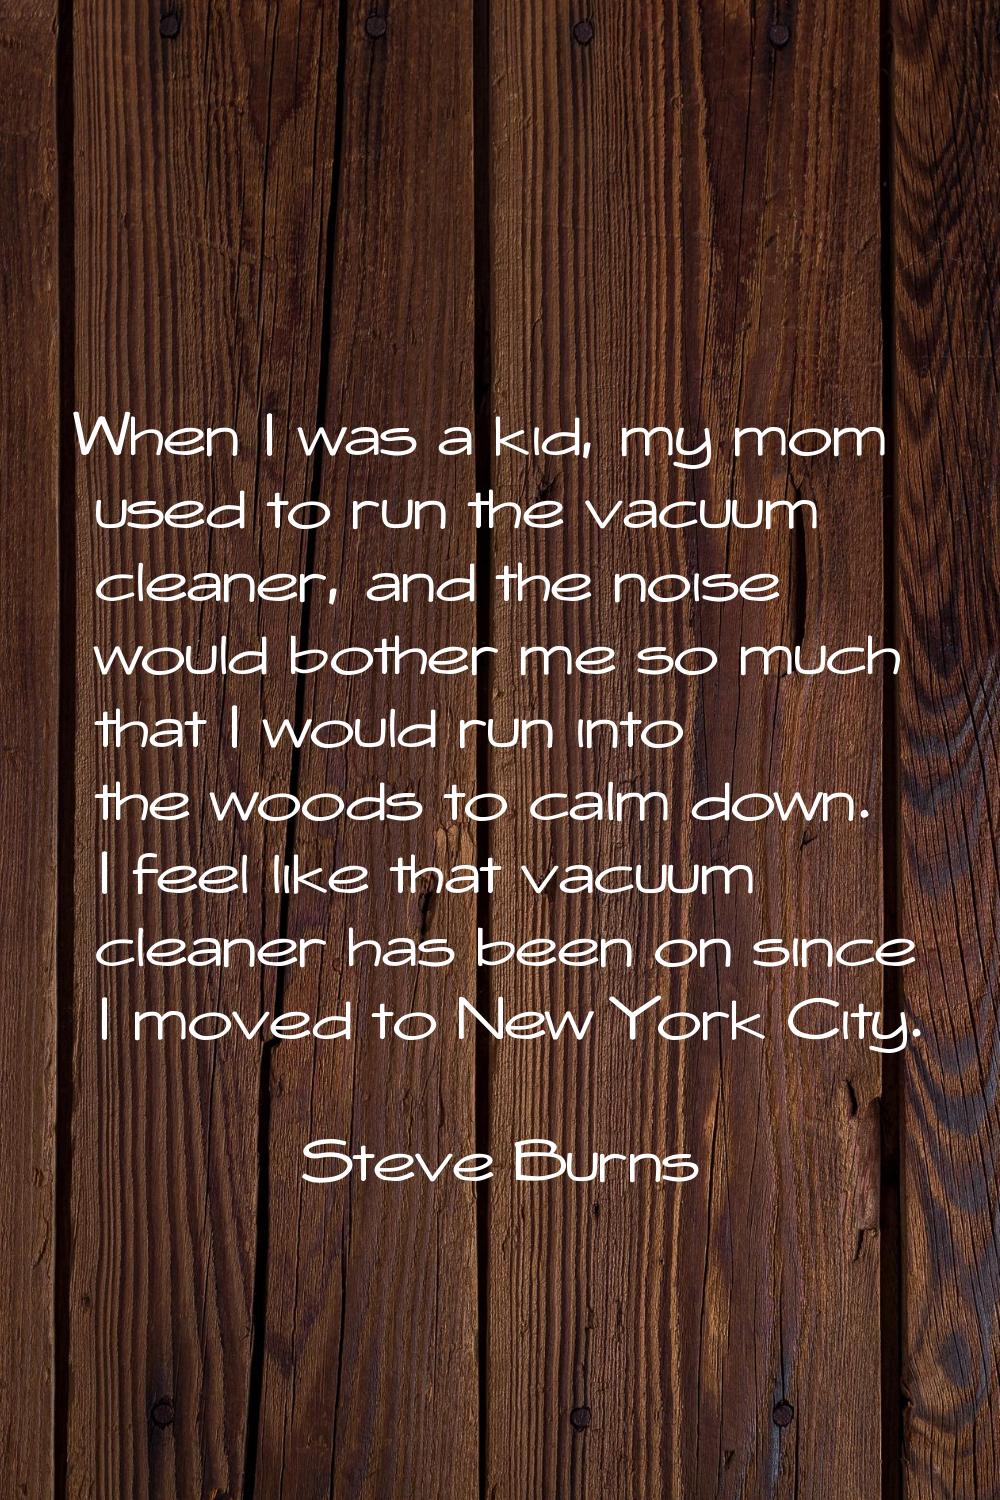 When I was a kid, my mom used to run the vacuum cleaner, and the noise would bother me so much that